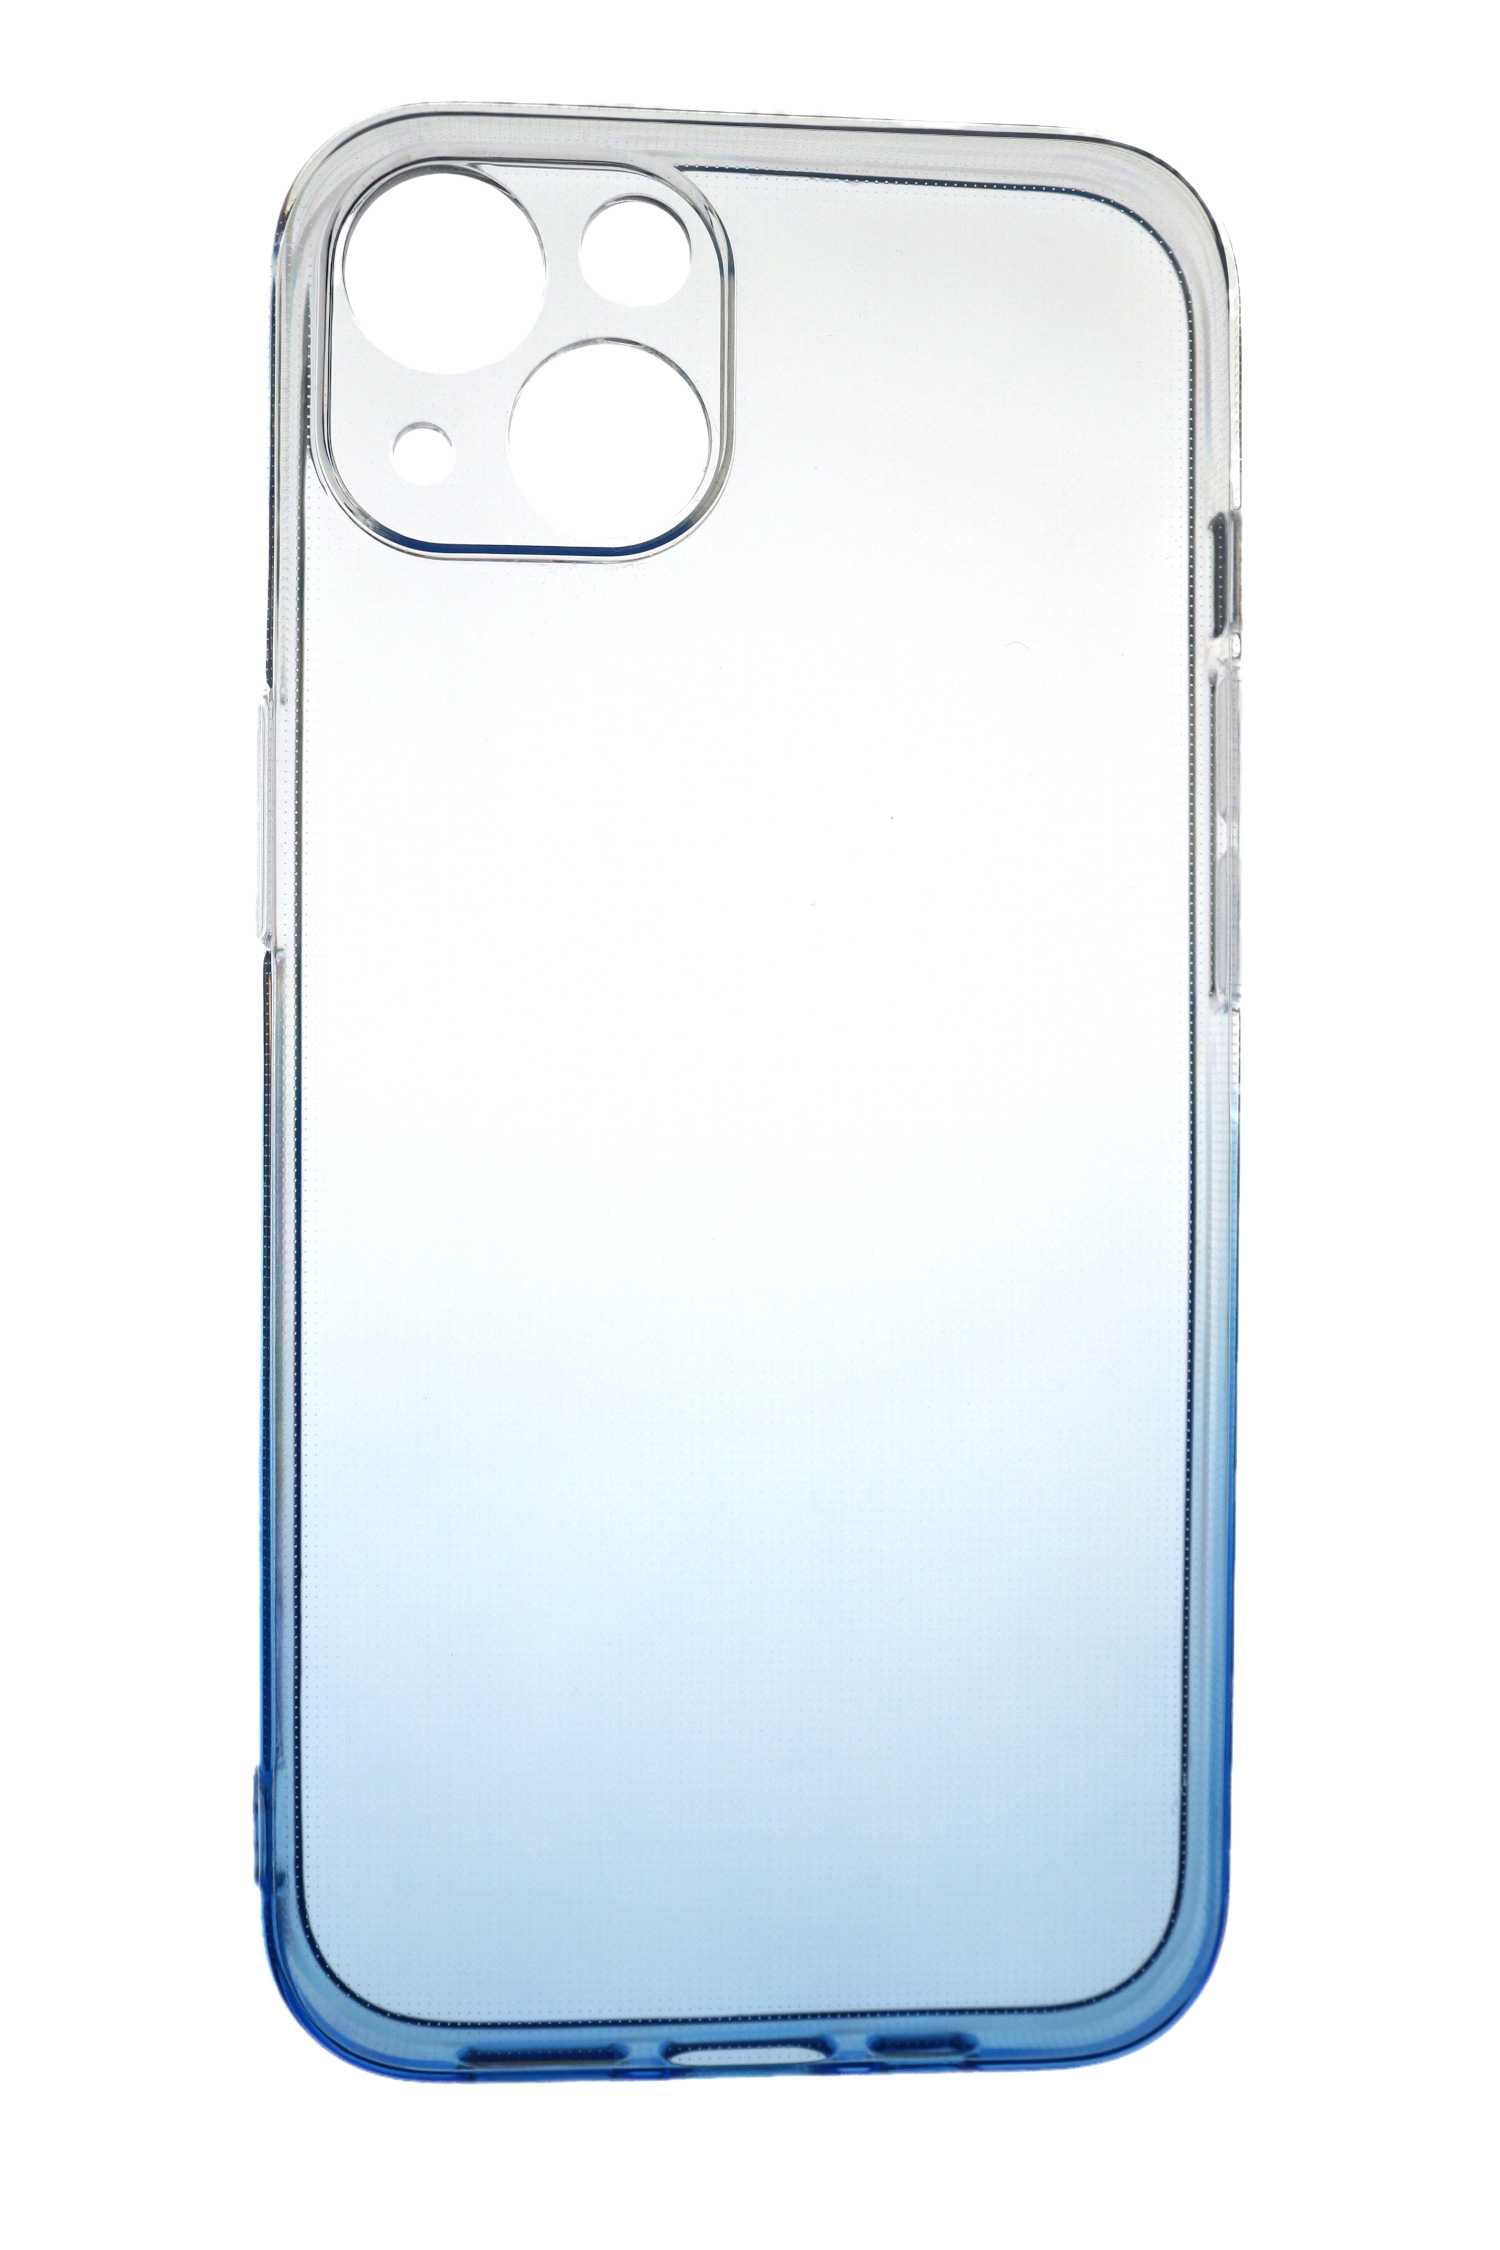 JAMCOVER 2.0 mm TPU Strong, iPhone Transparent Apple, Blau, 14, Case Backcover